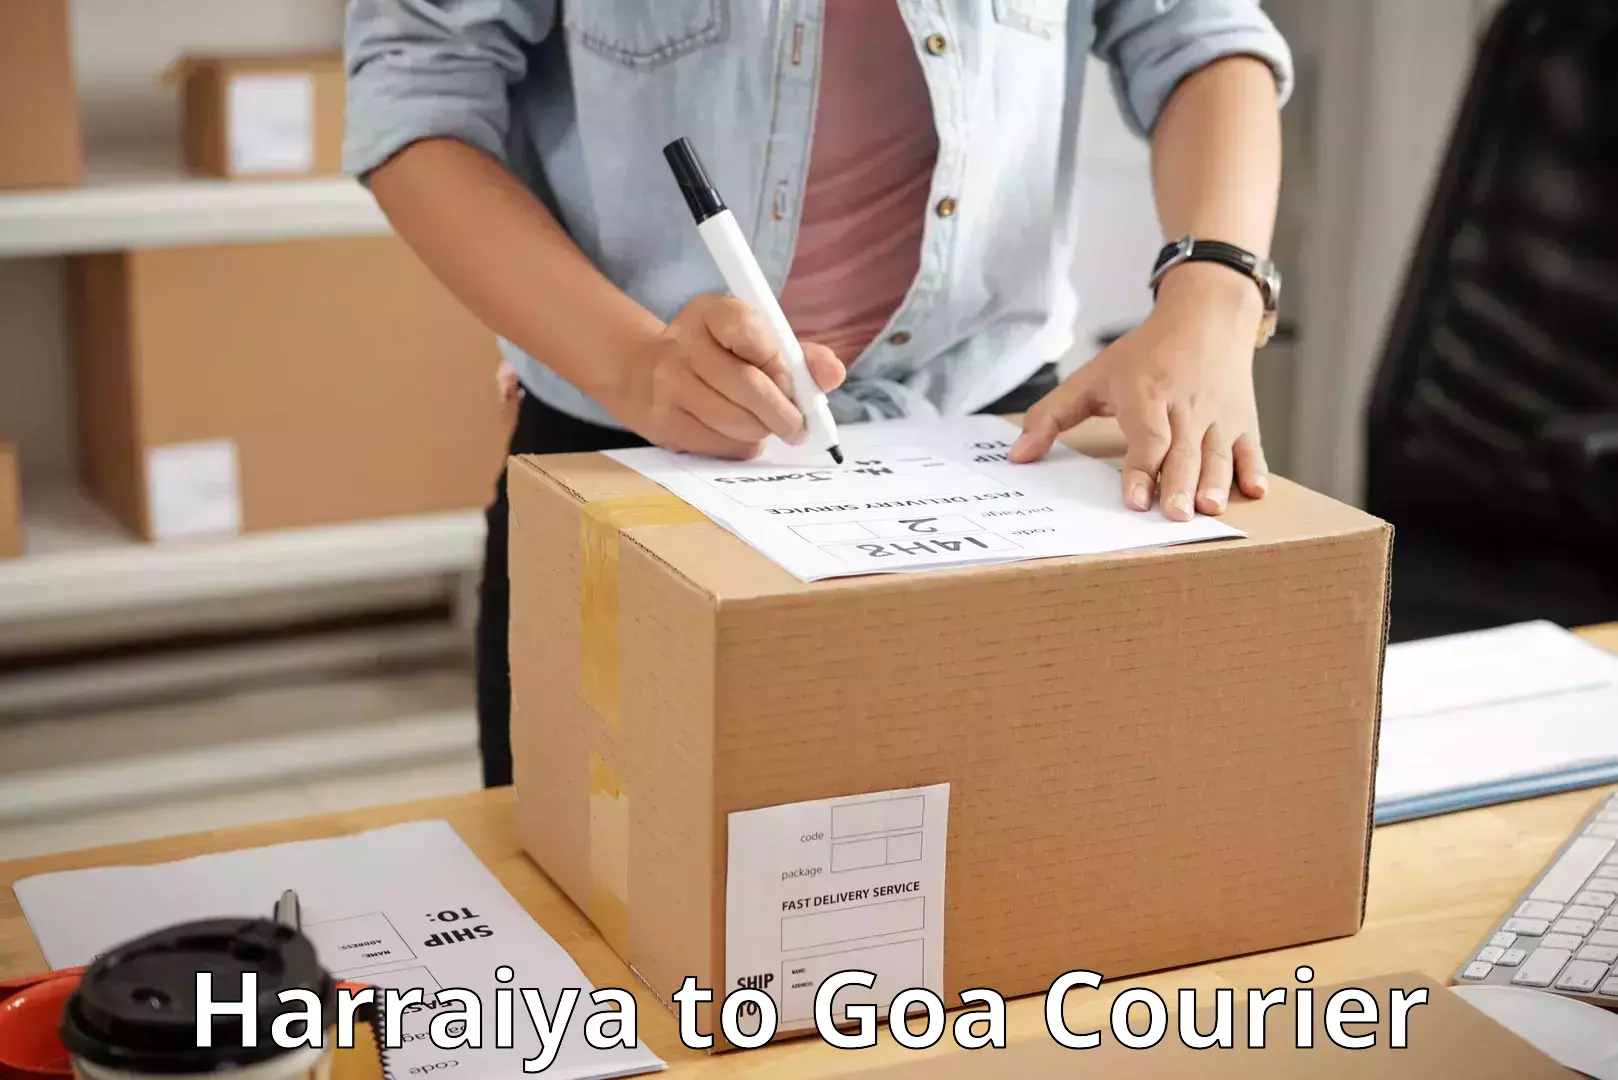 Efficient package consolidation Harraiya to Goa